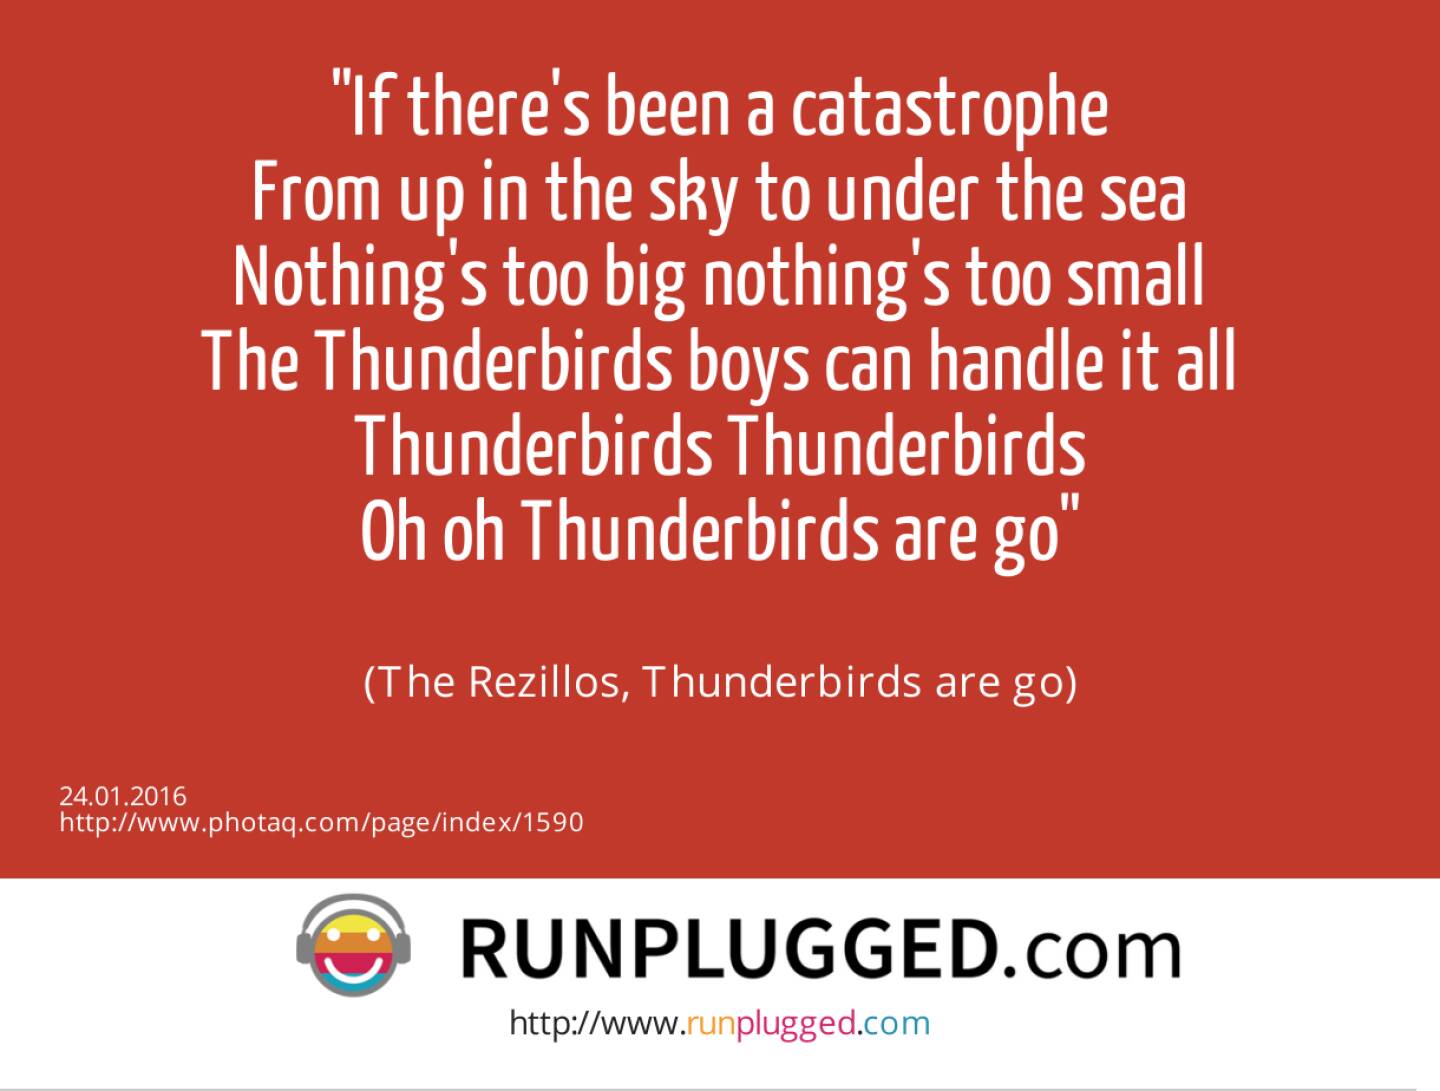 If there's been a catastrophe<br>From up in the sky to under the sea<br>Nothing's too big nothing's too small<br>The Thunderbirds boys can handle it all<br>Thunderbirds Thunderbirds<br>Oh oh Thunderbirds are go<br><br> (The Rezillos, Thunderbirds are go)